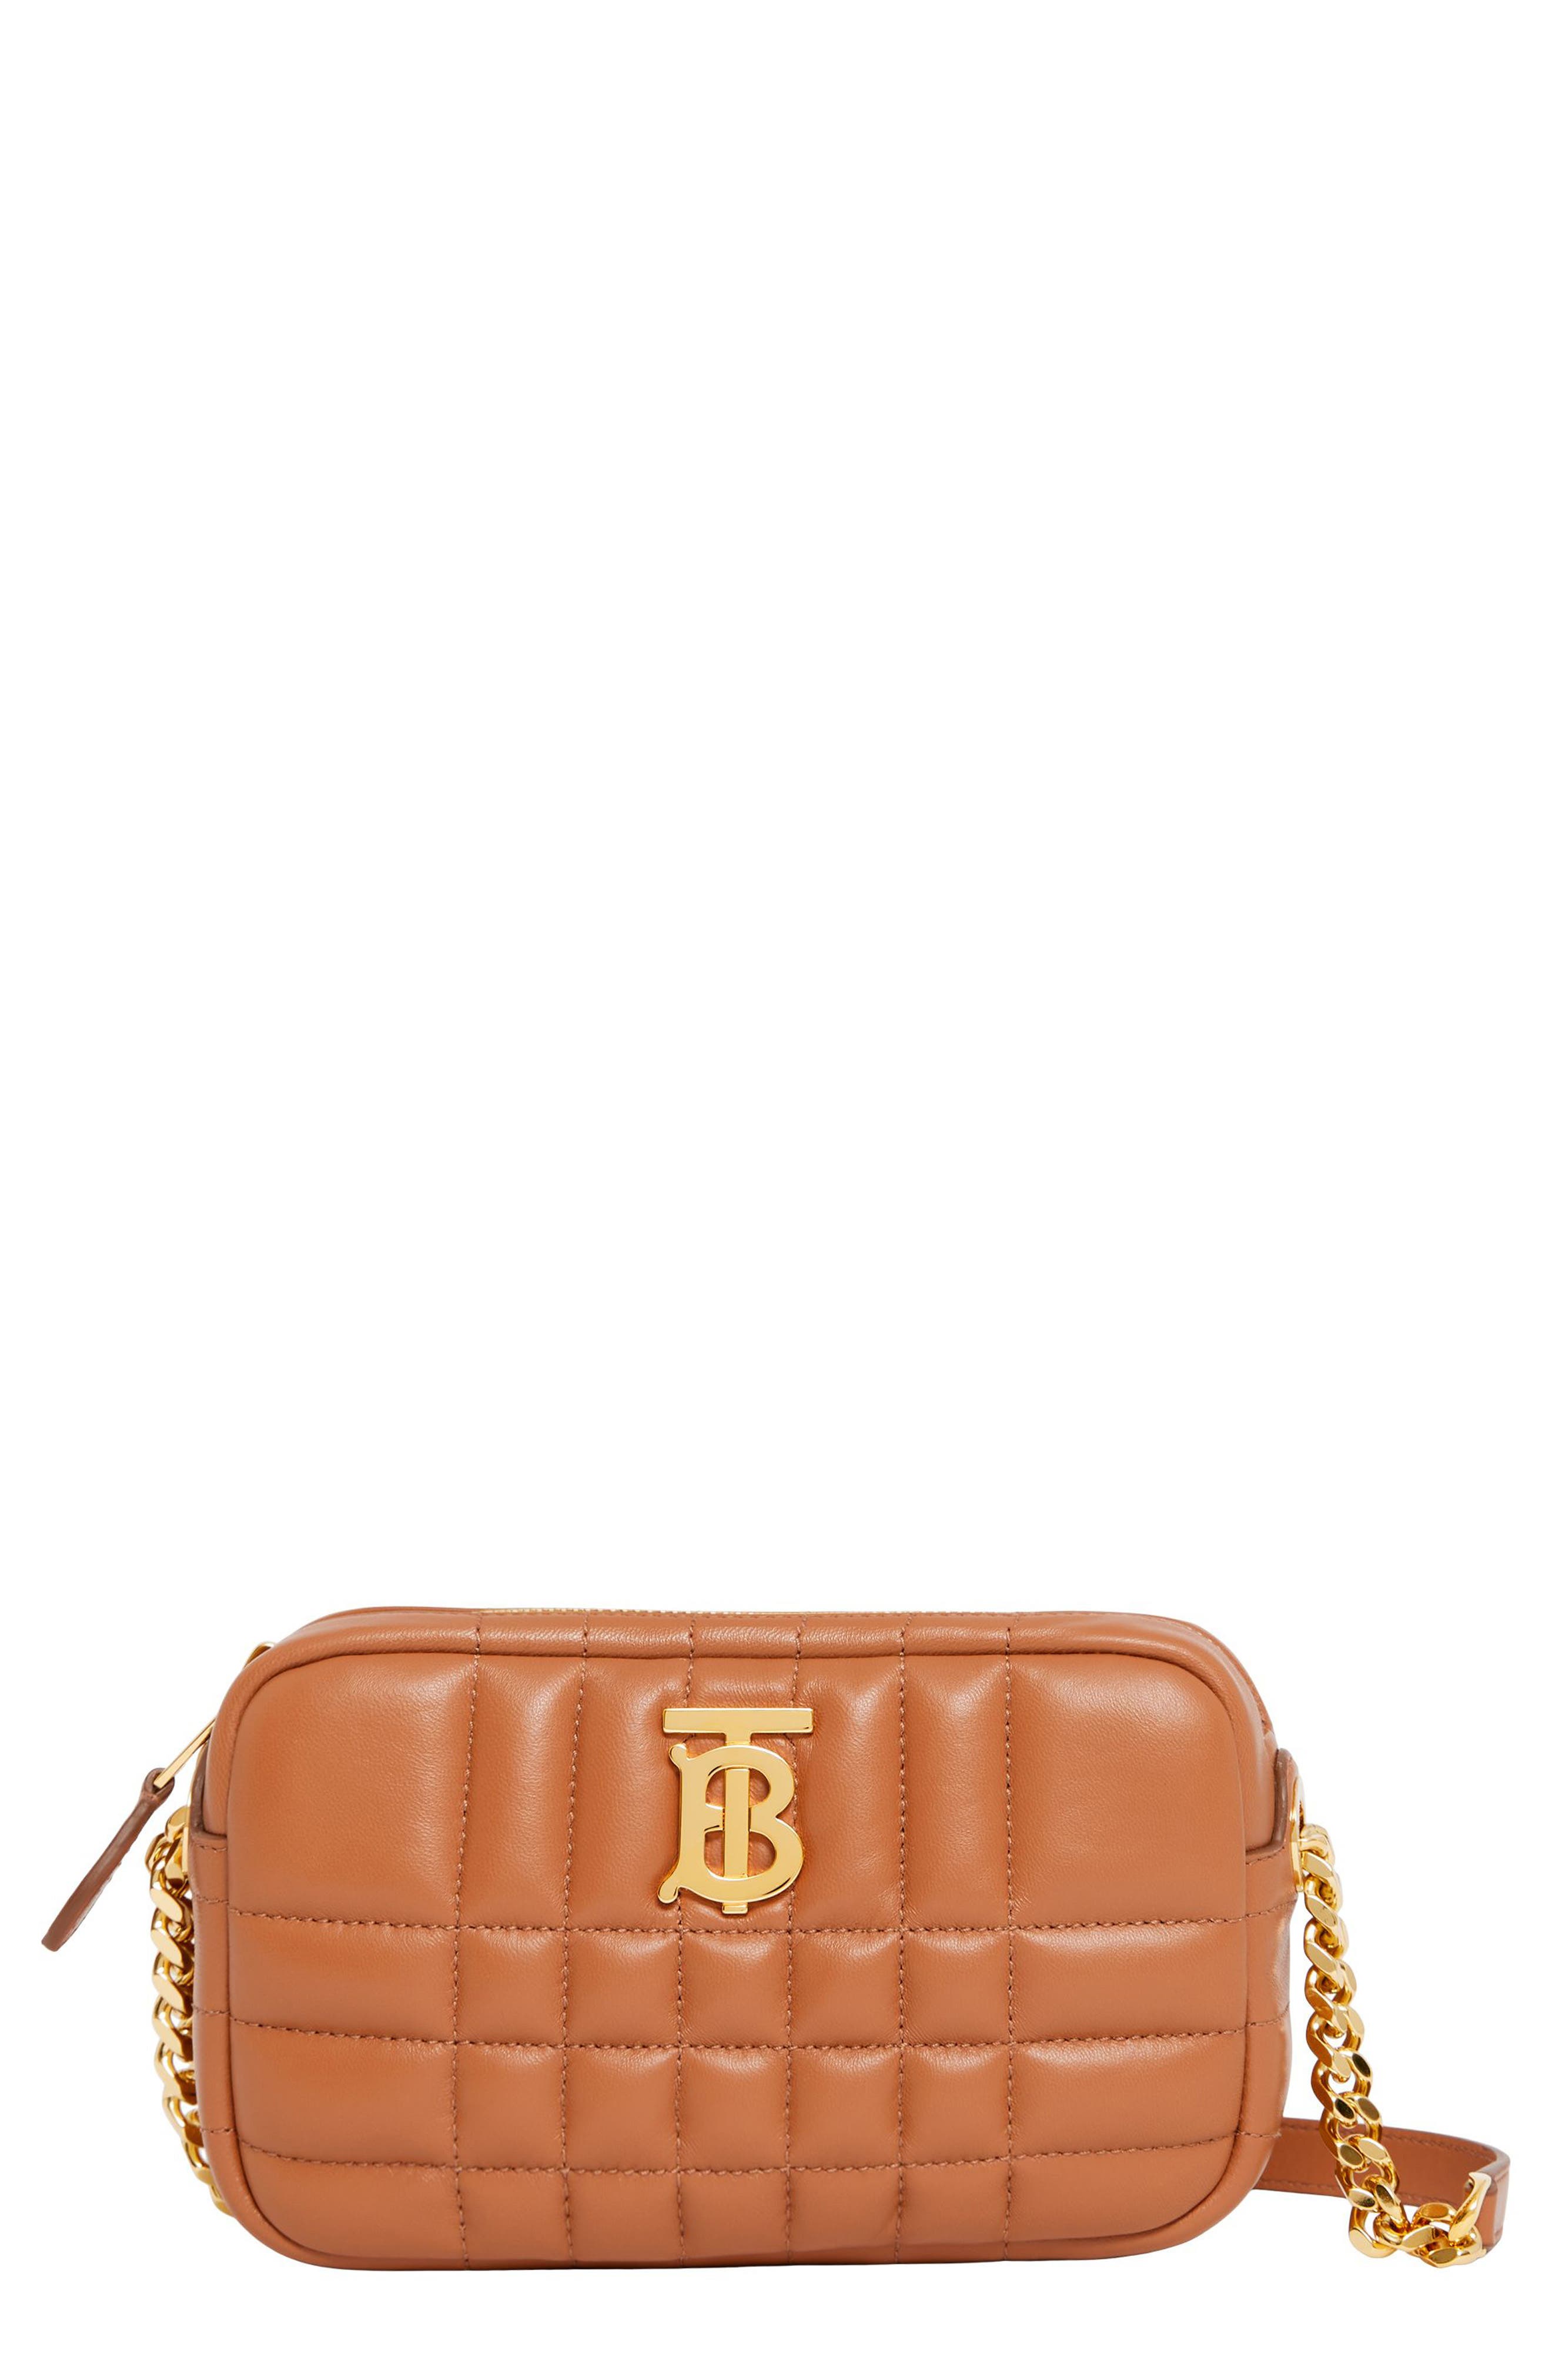 Burberry Mini Lola Check Quilted Leather Camera Crossbody Bag in Marple Brown at Nordstrom